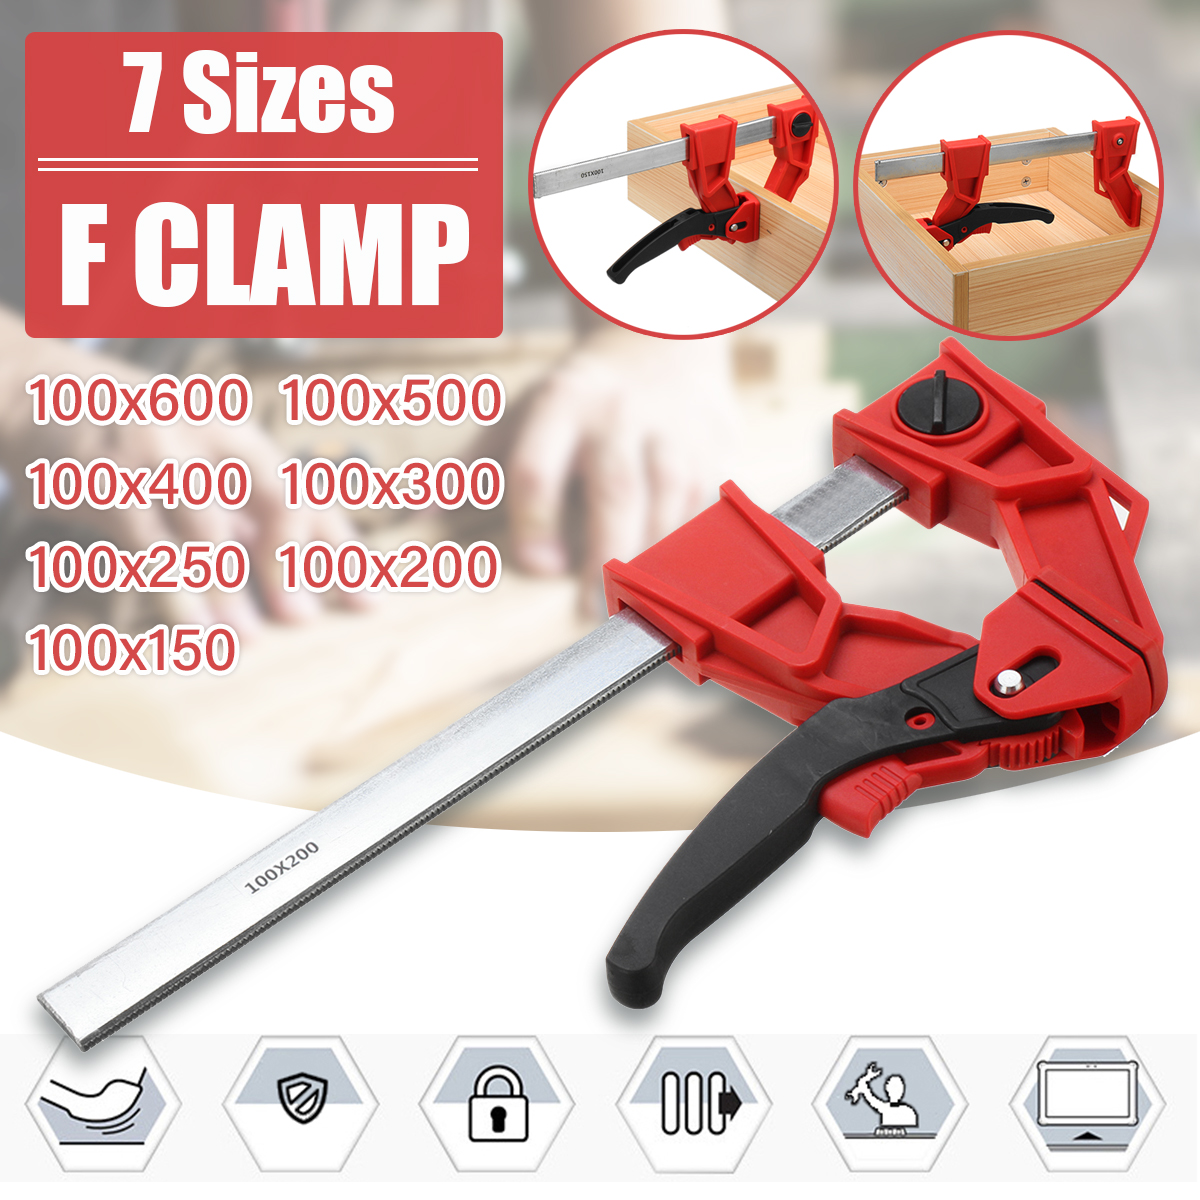 150-600mm-Length-Clamping-Wood-F-Clamp-100mm-Width-Woodworking-Fast-Clamp-1471413-1